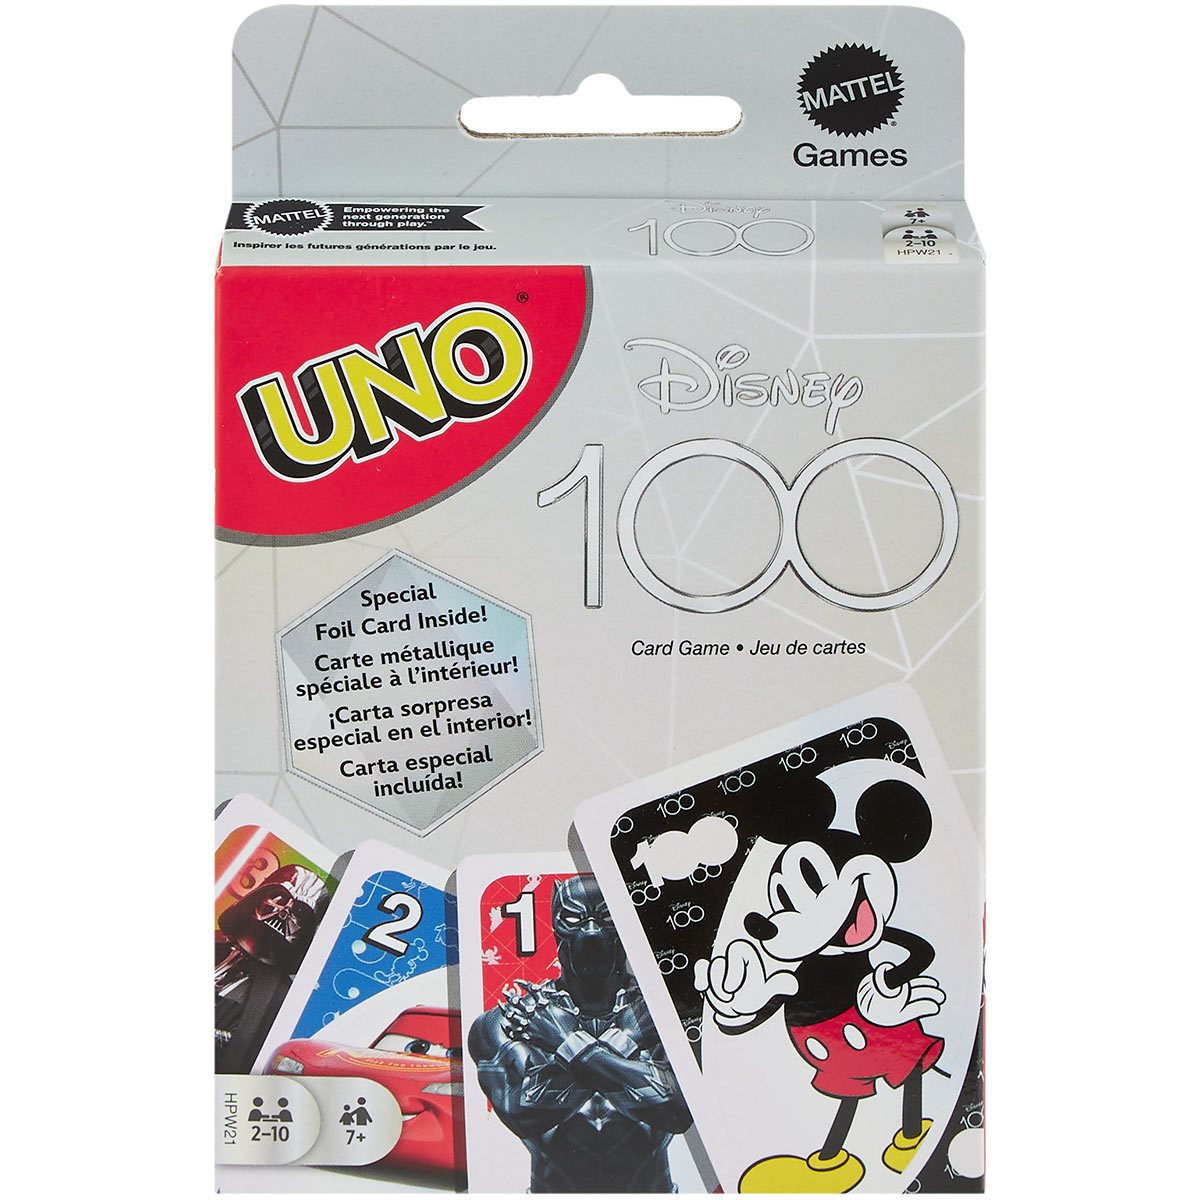 Uno - Flip Pack - Epic Games Store